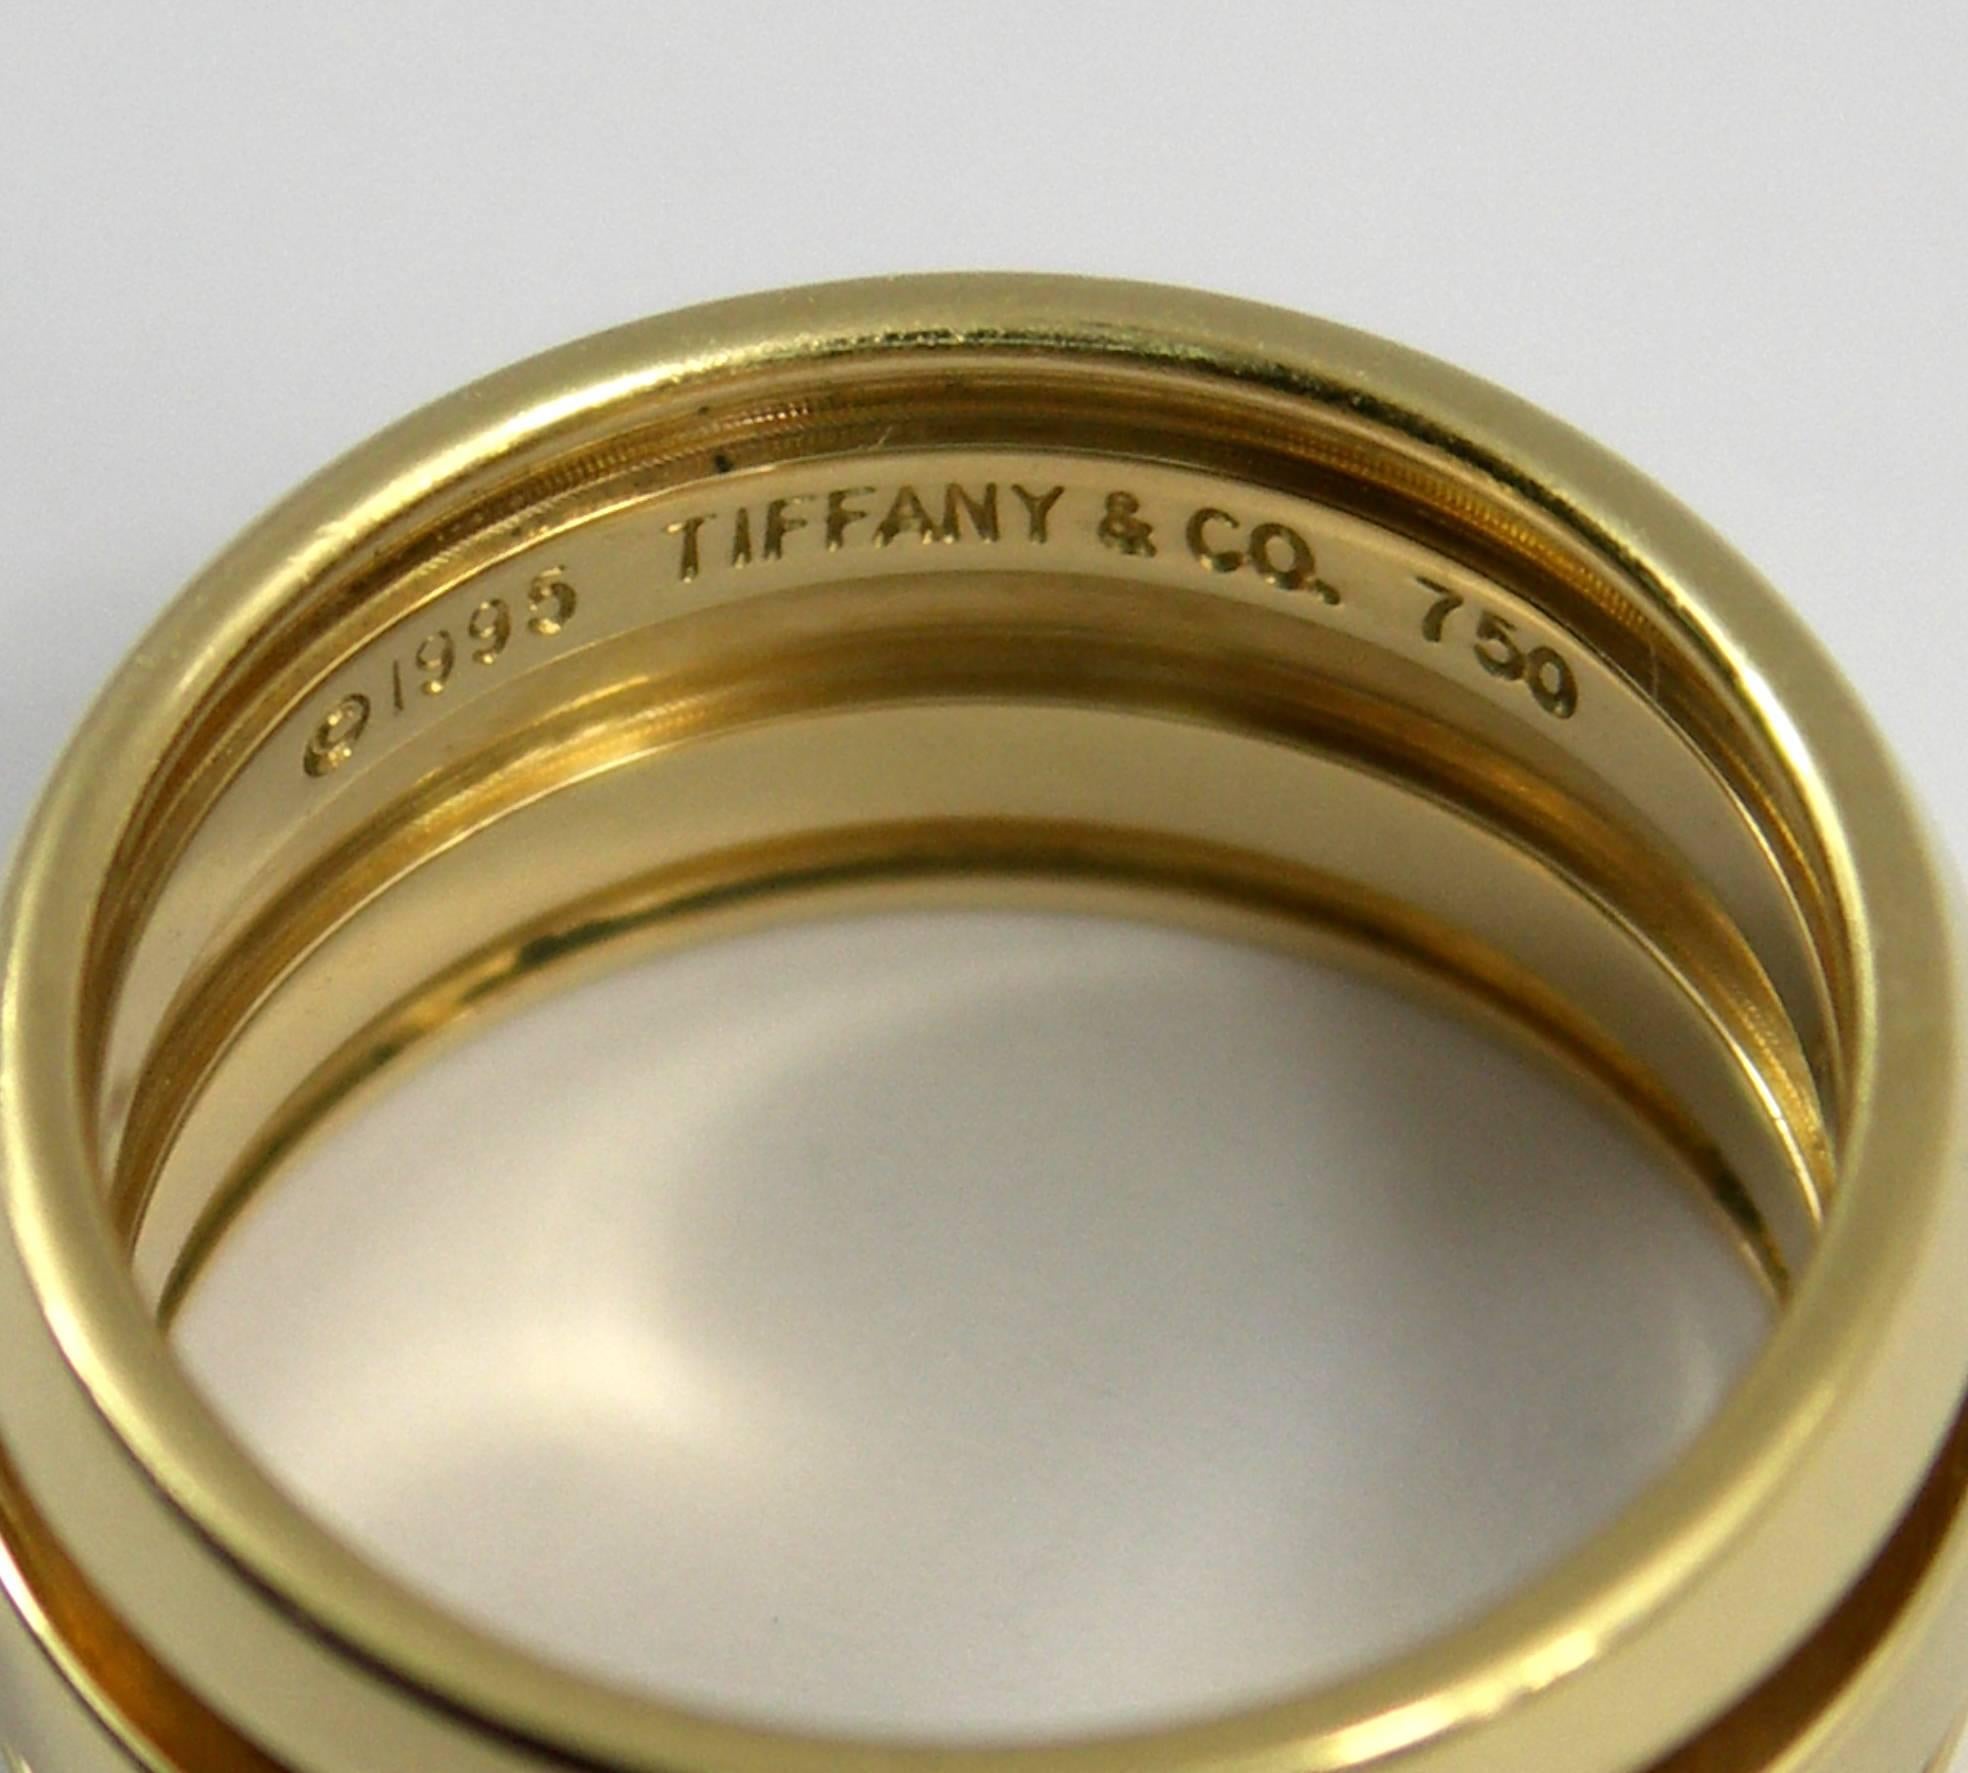 Tiffany & Co. Satin and High Polished Gold Band Ring 1